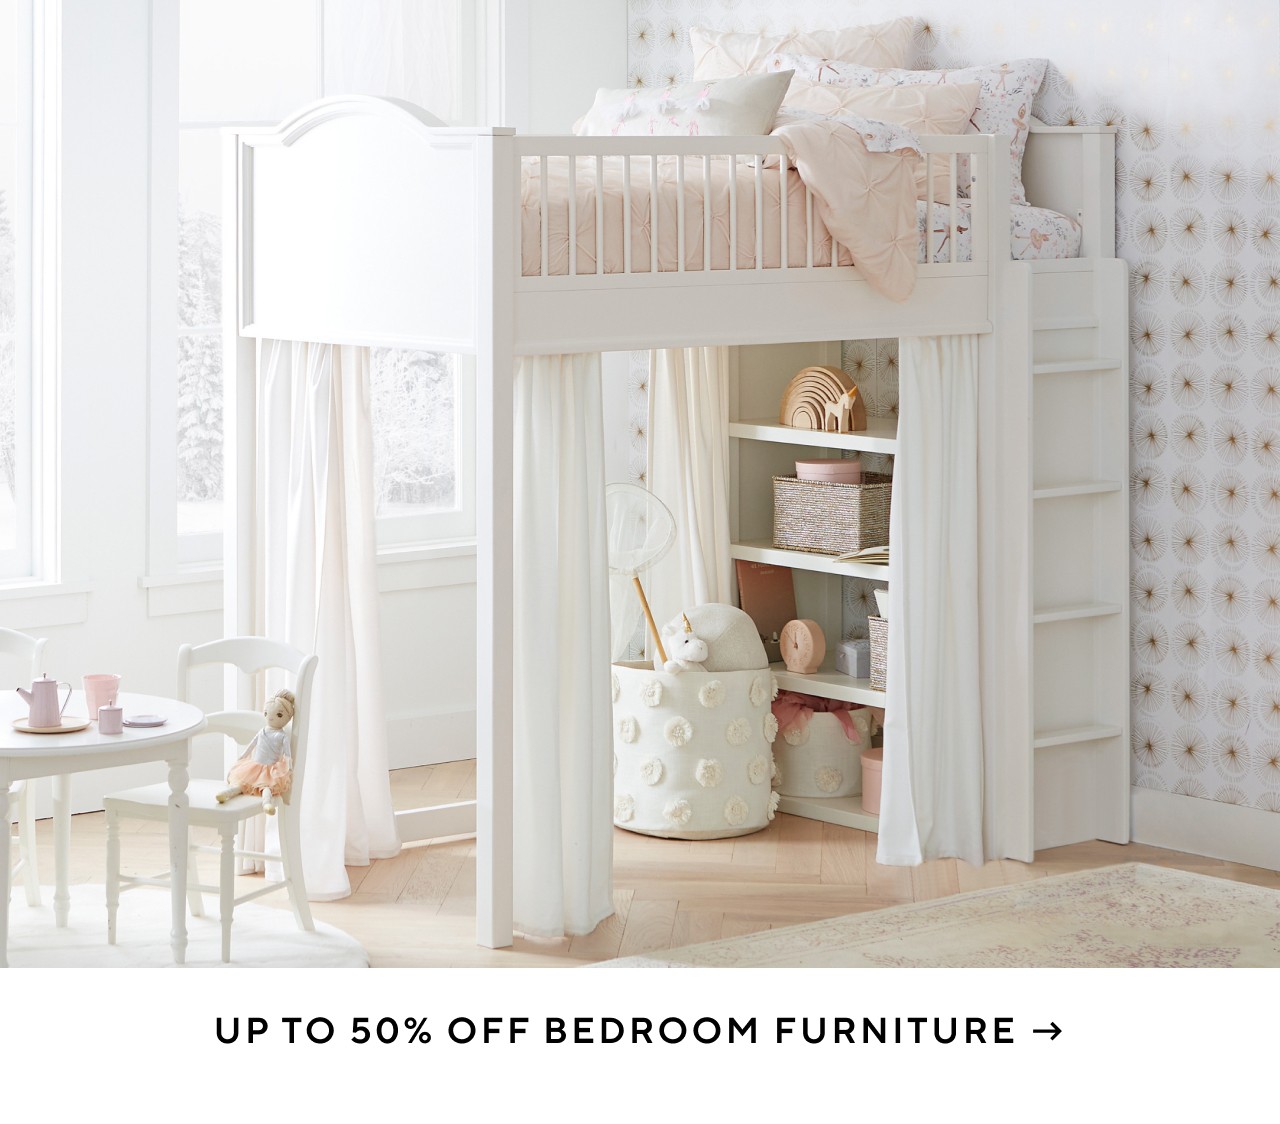 UP TO 50% OFF BEDROOM FURNITURE